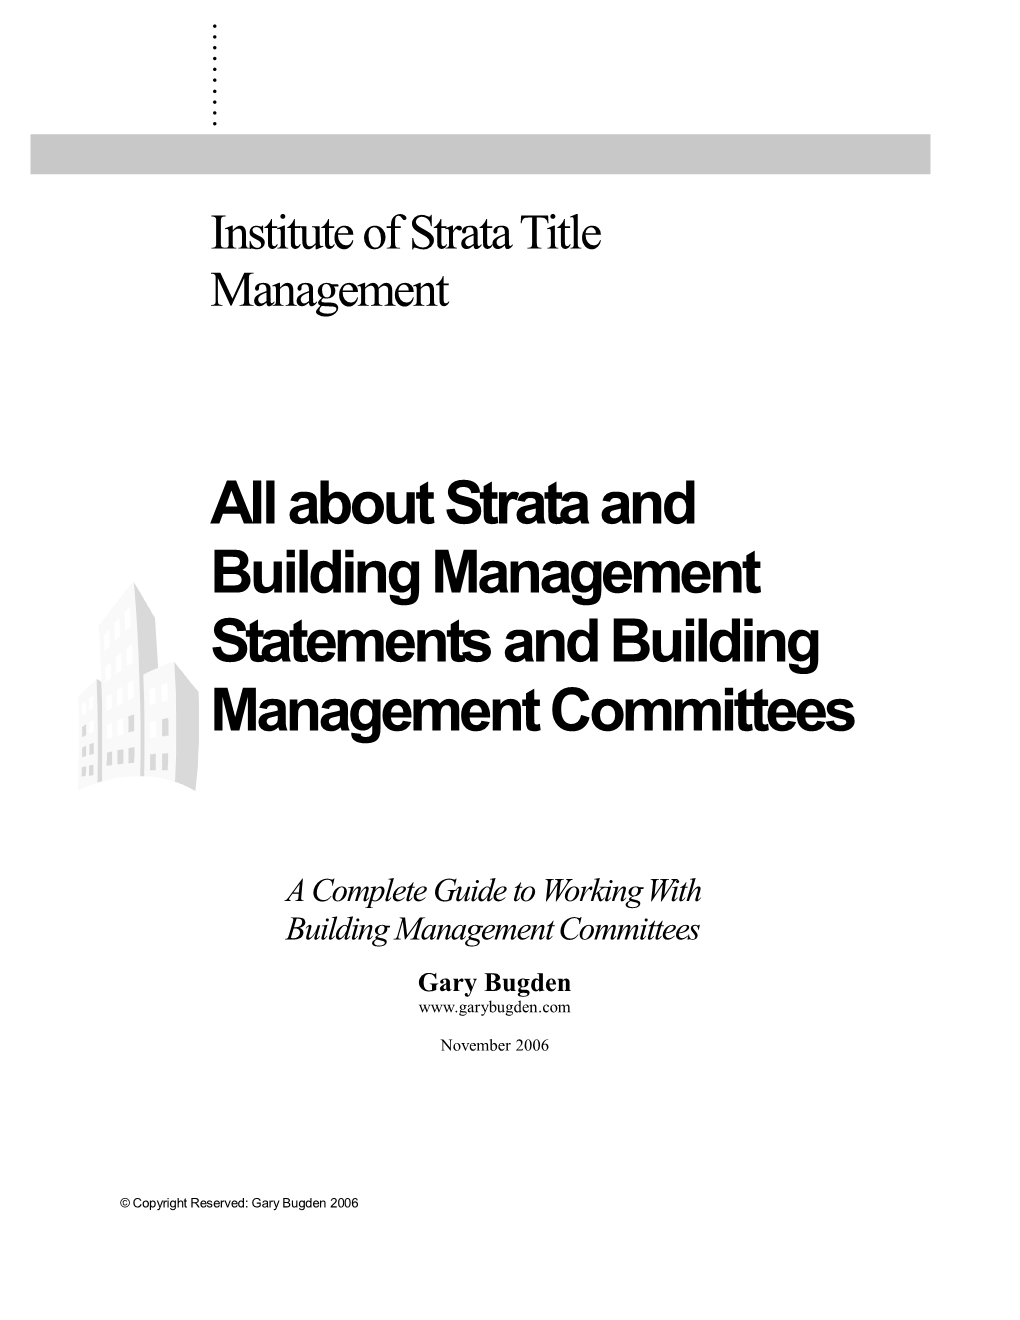 All About Strata and Building Management Statements and Building Management Committees